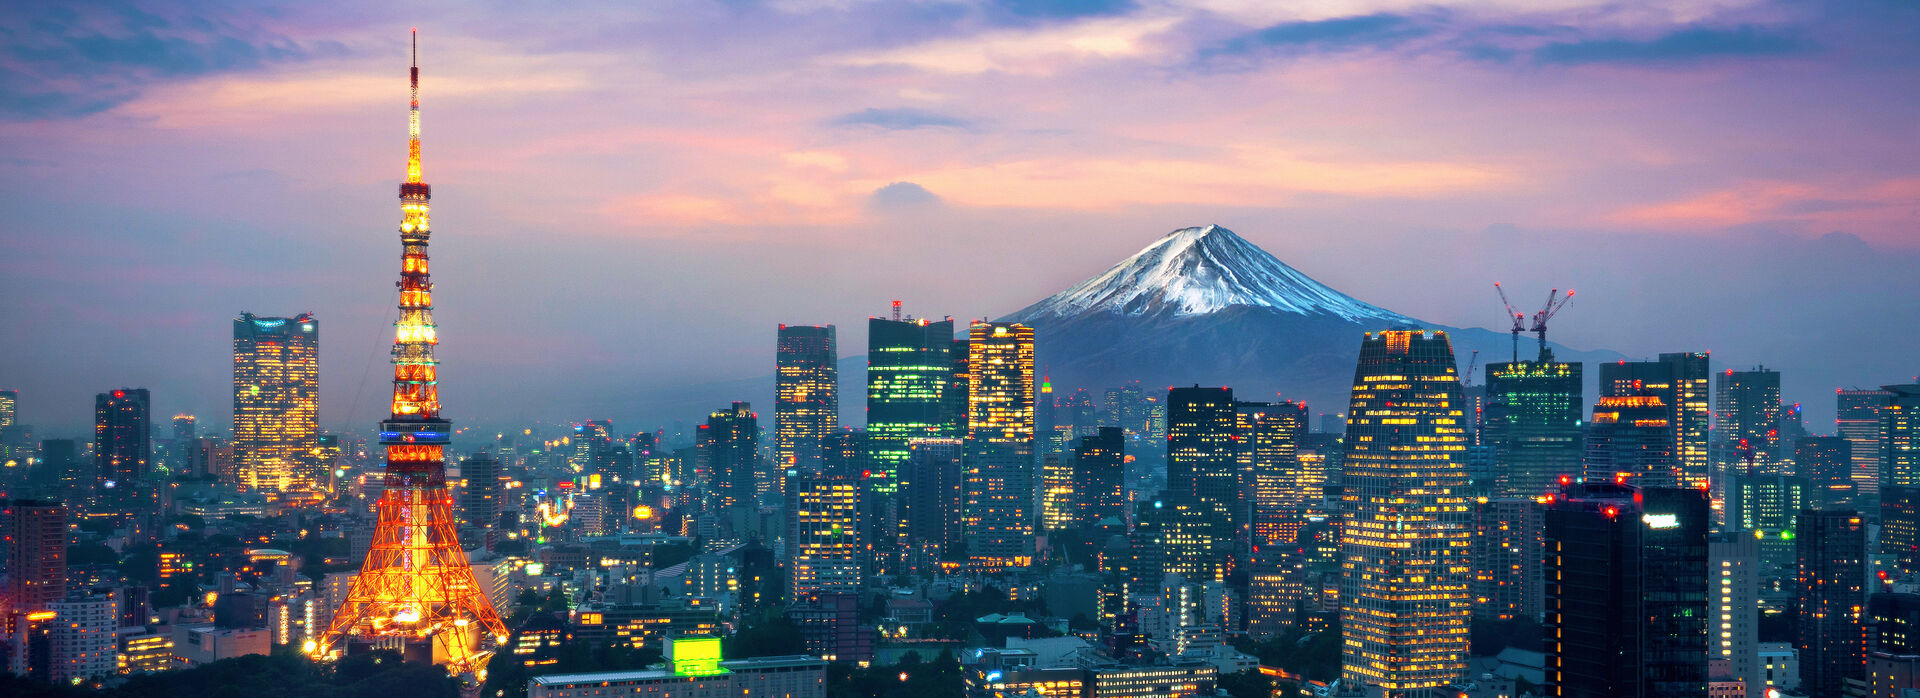 Tokyo will host the 2020 Olympic Games in 2021.